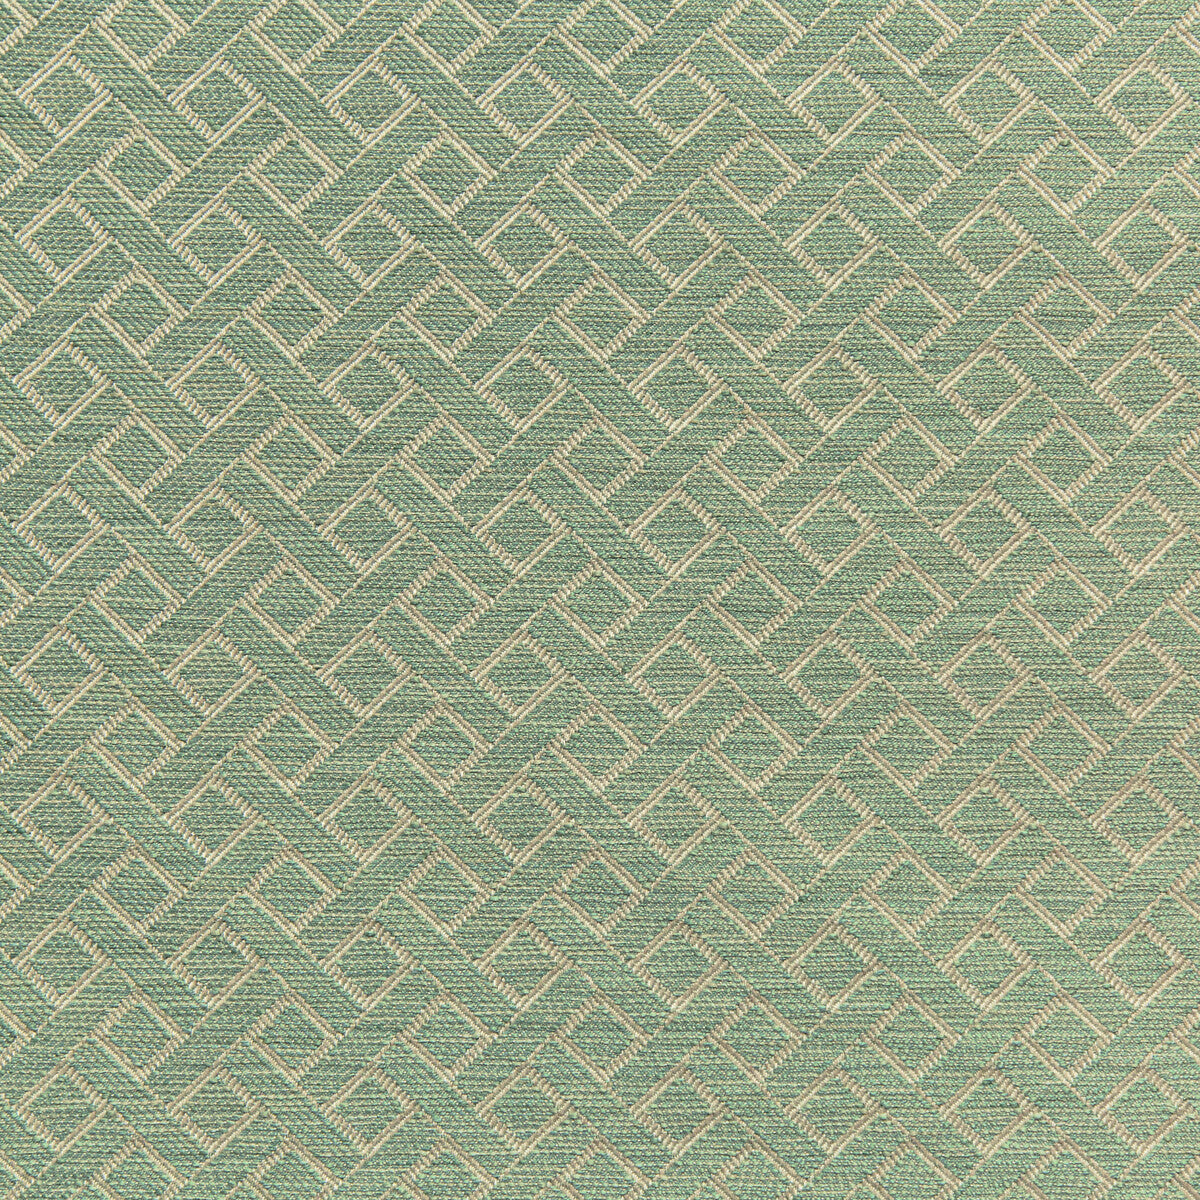 Maldon Weave fabric in mist color - pattern 2020102.13.0 - by Lee Jofa in the Linford Weaves collection